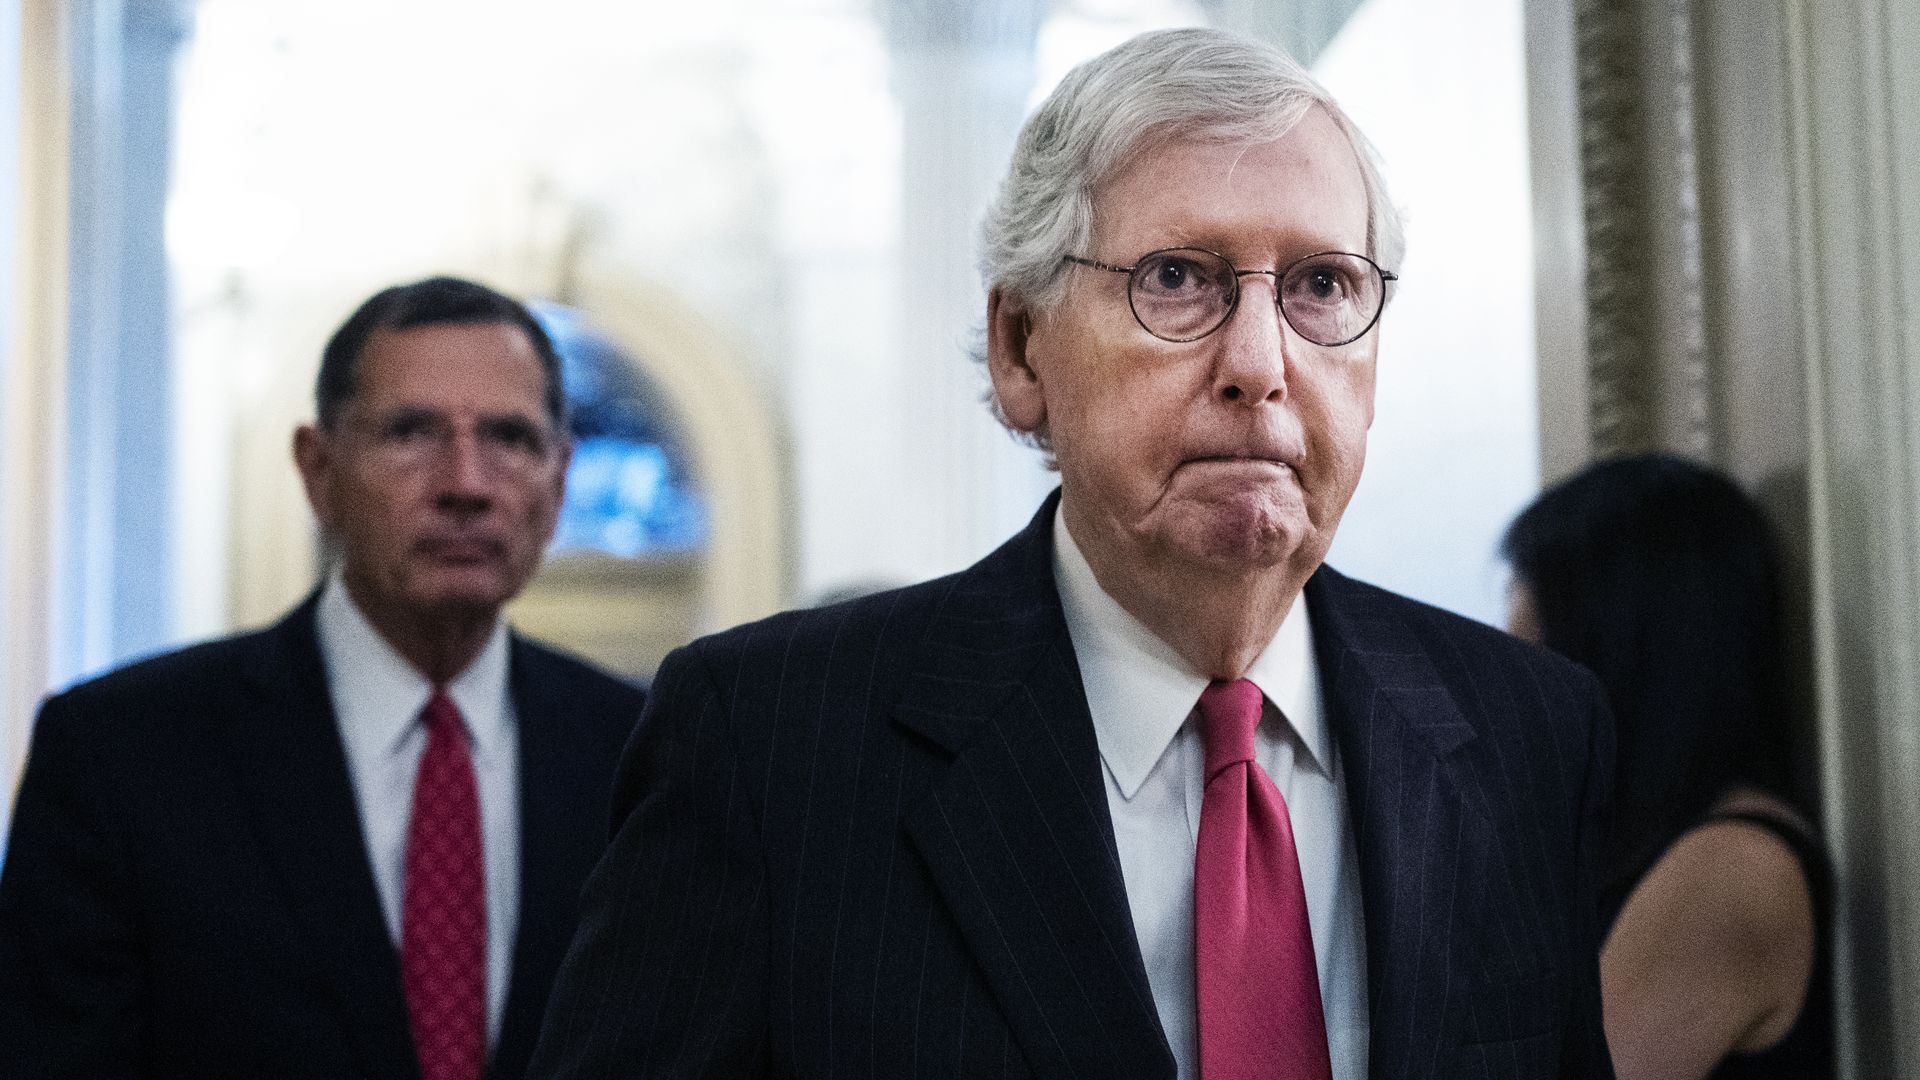 Photo of Mitch McConnell walking in a hall with his lips pursed